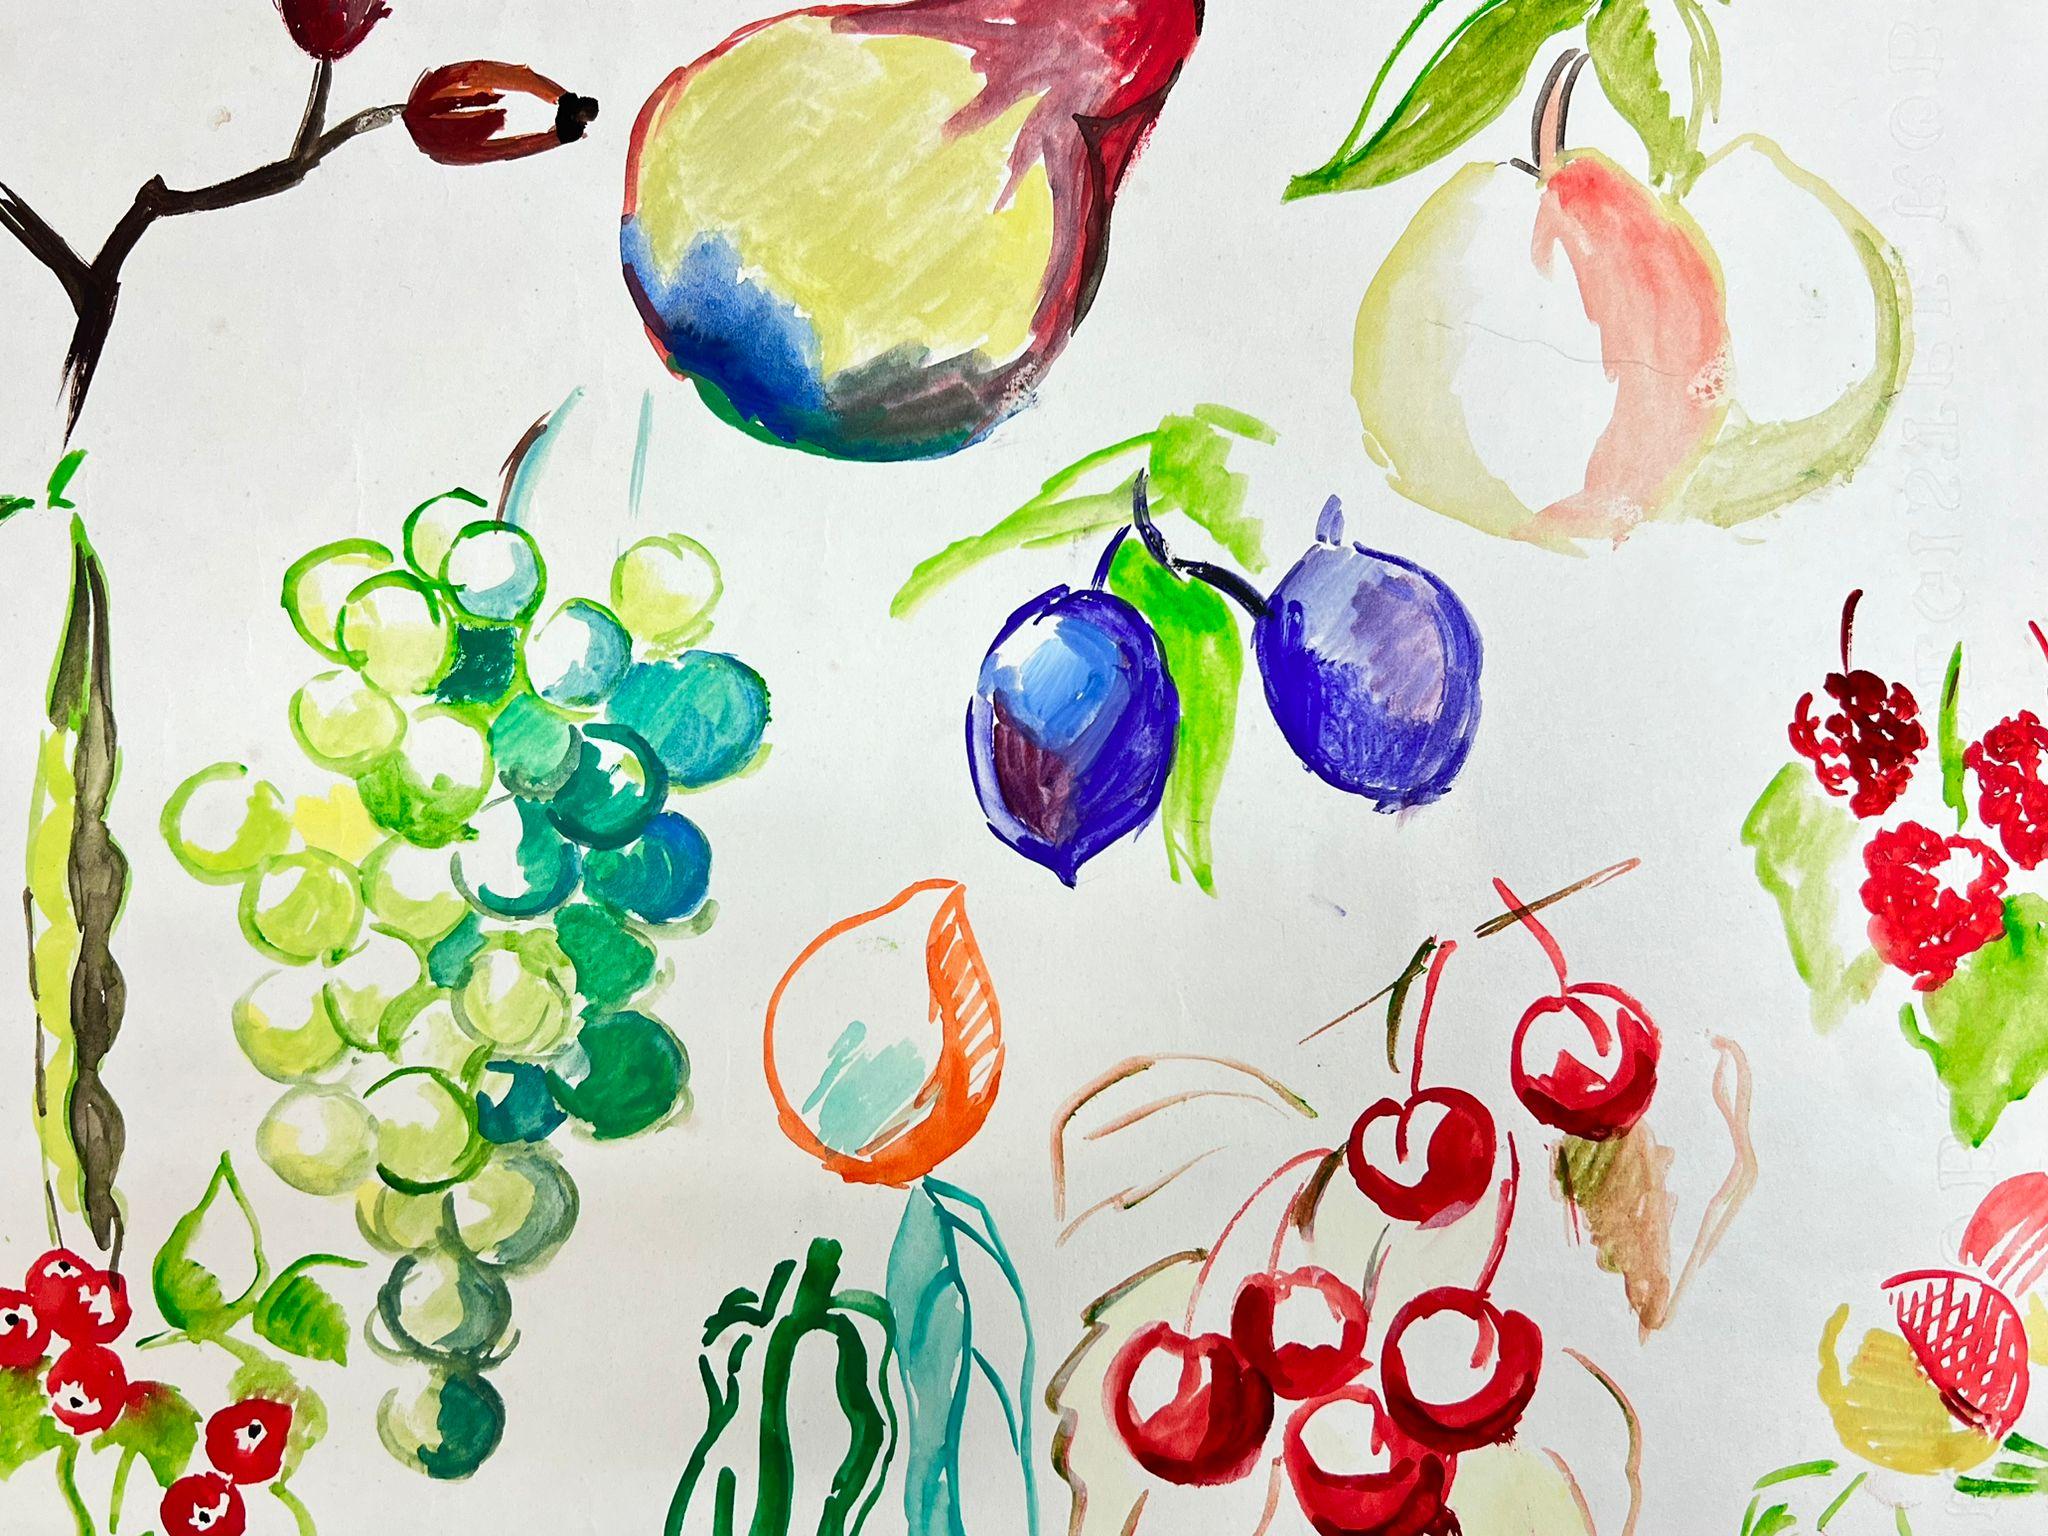 Mid Century French Colorful Illustration Sketches Of Different Fruits - Painting by Josine Vignon